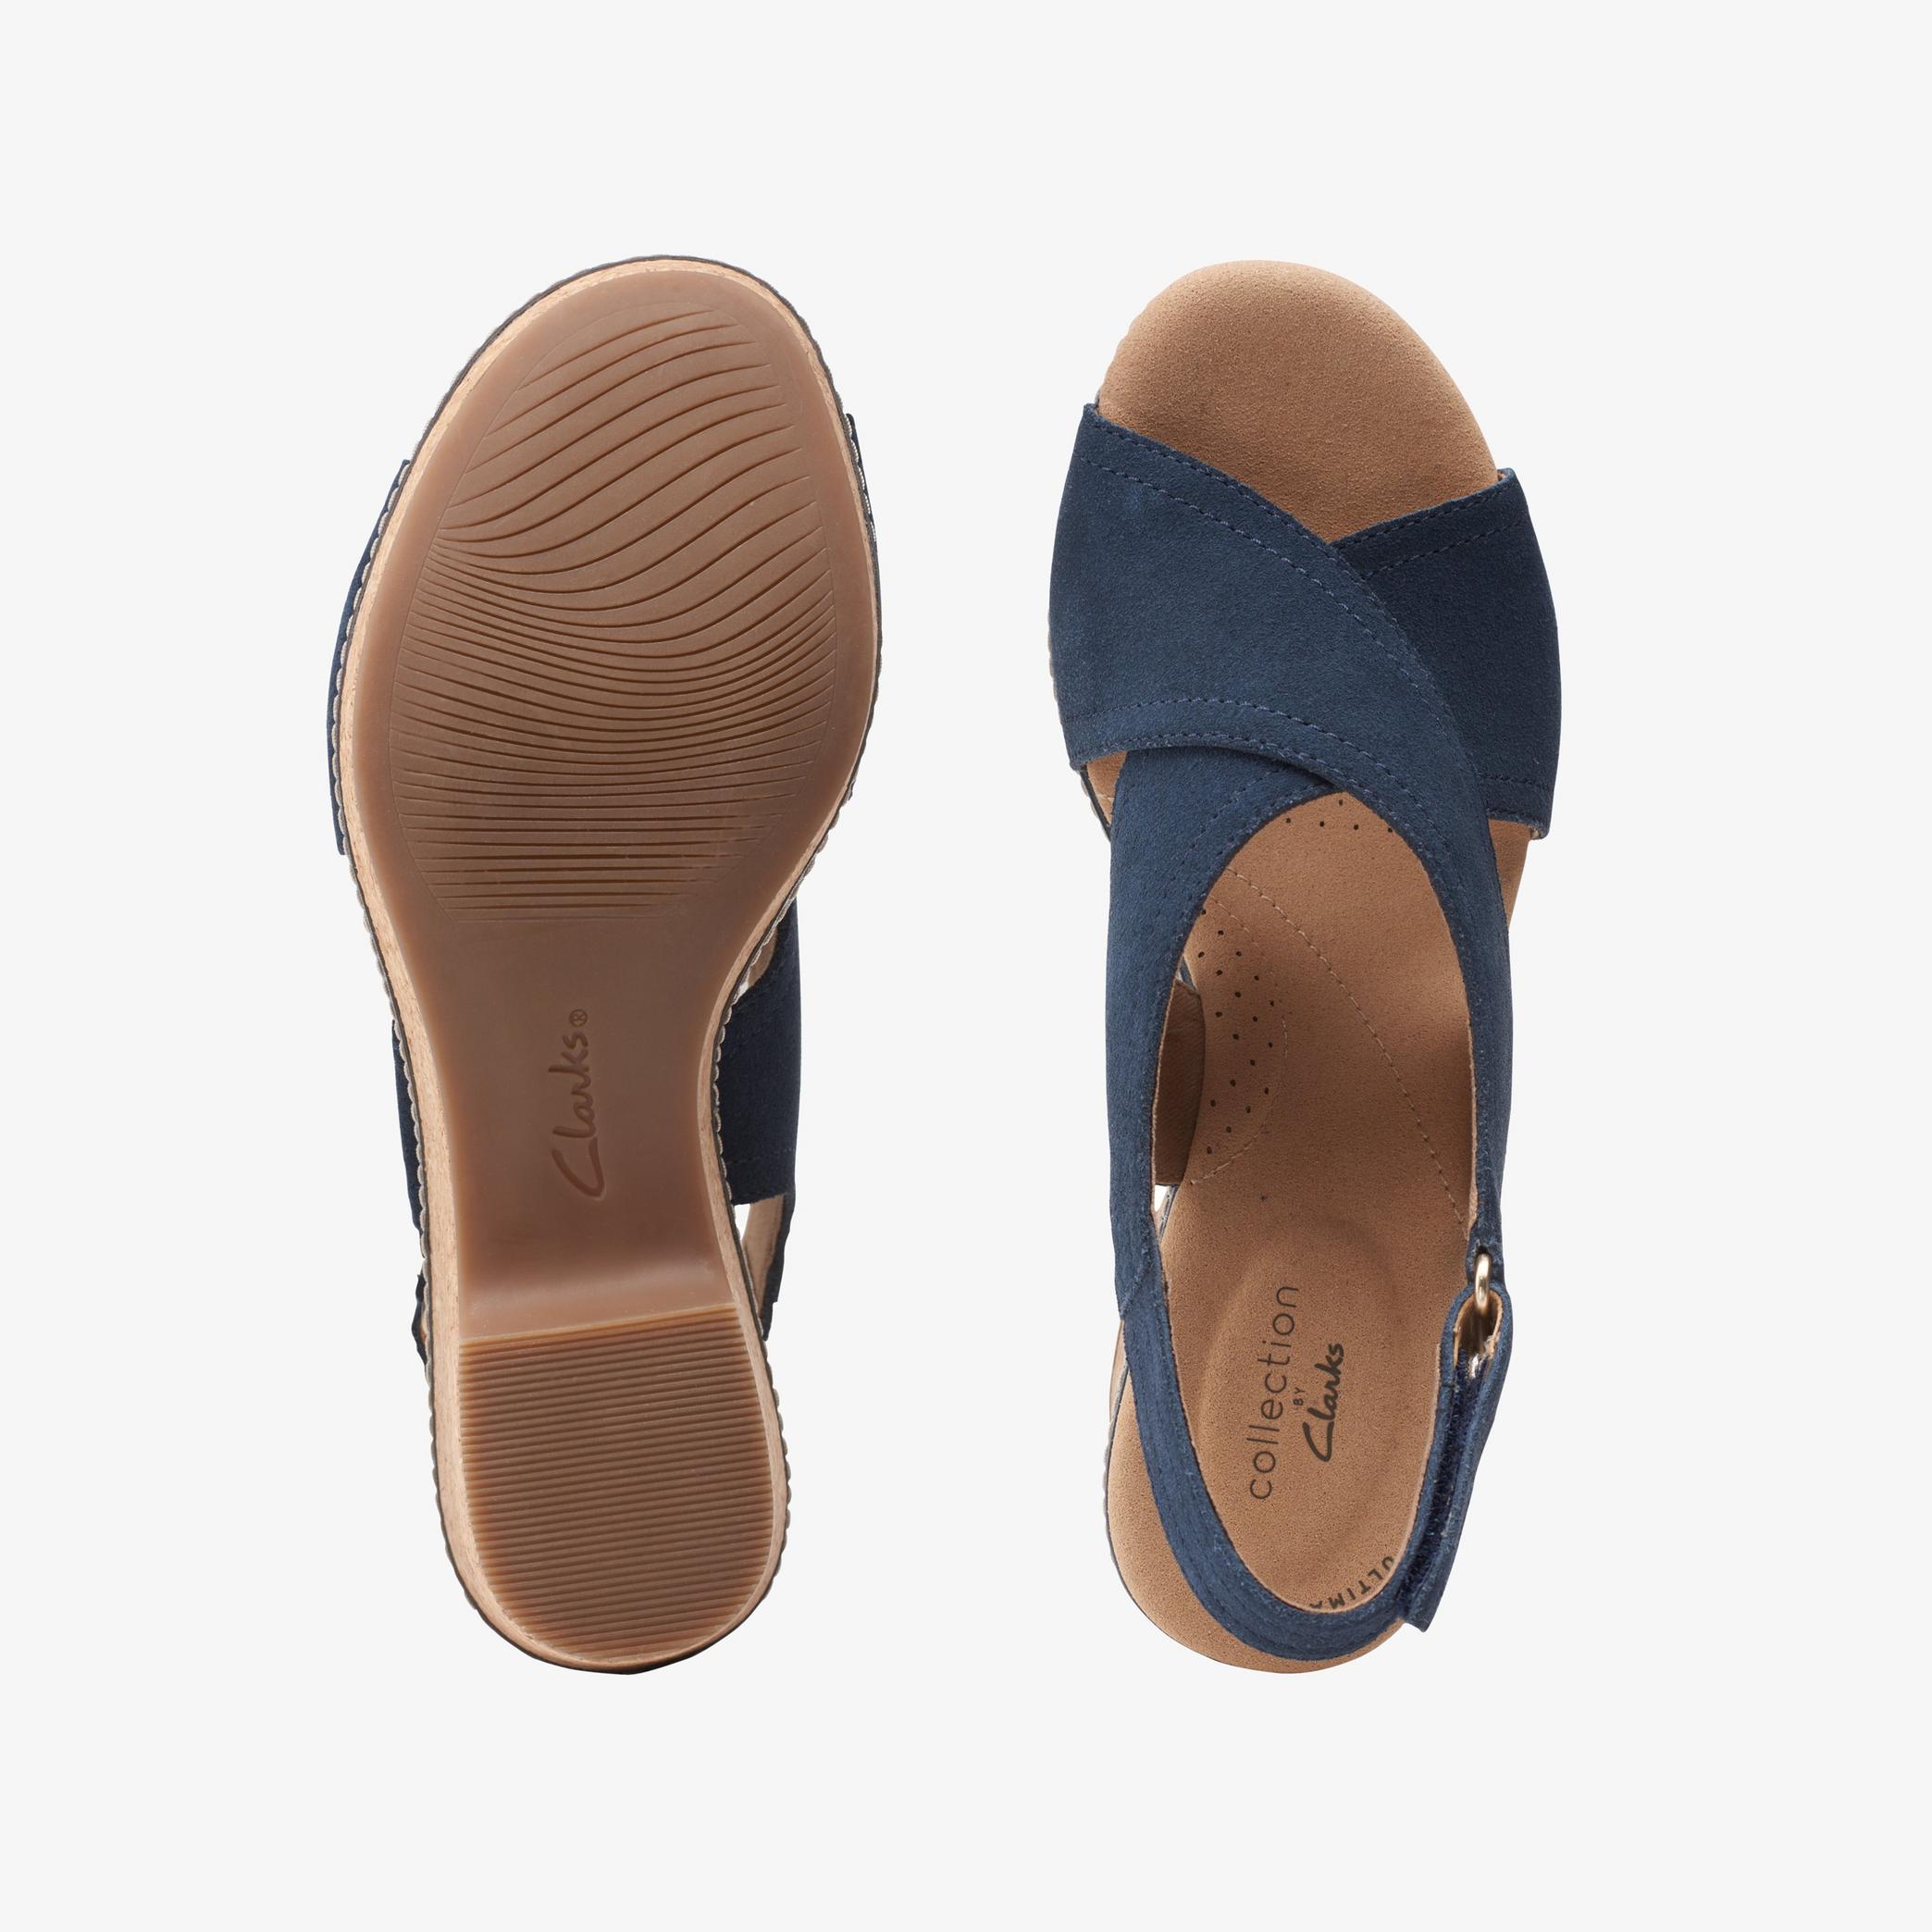 WOMENS Giselle Cove Navy Wedges | Clarks Outlet